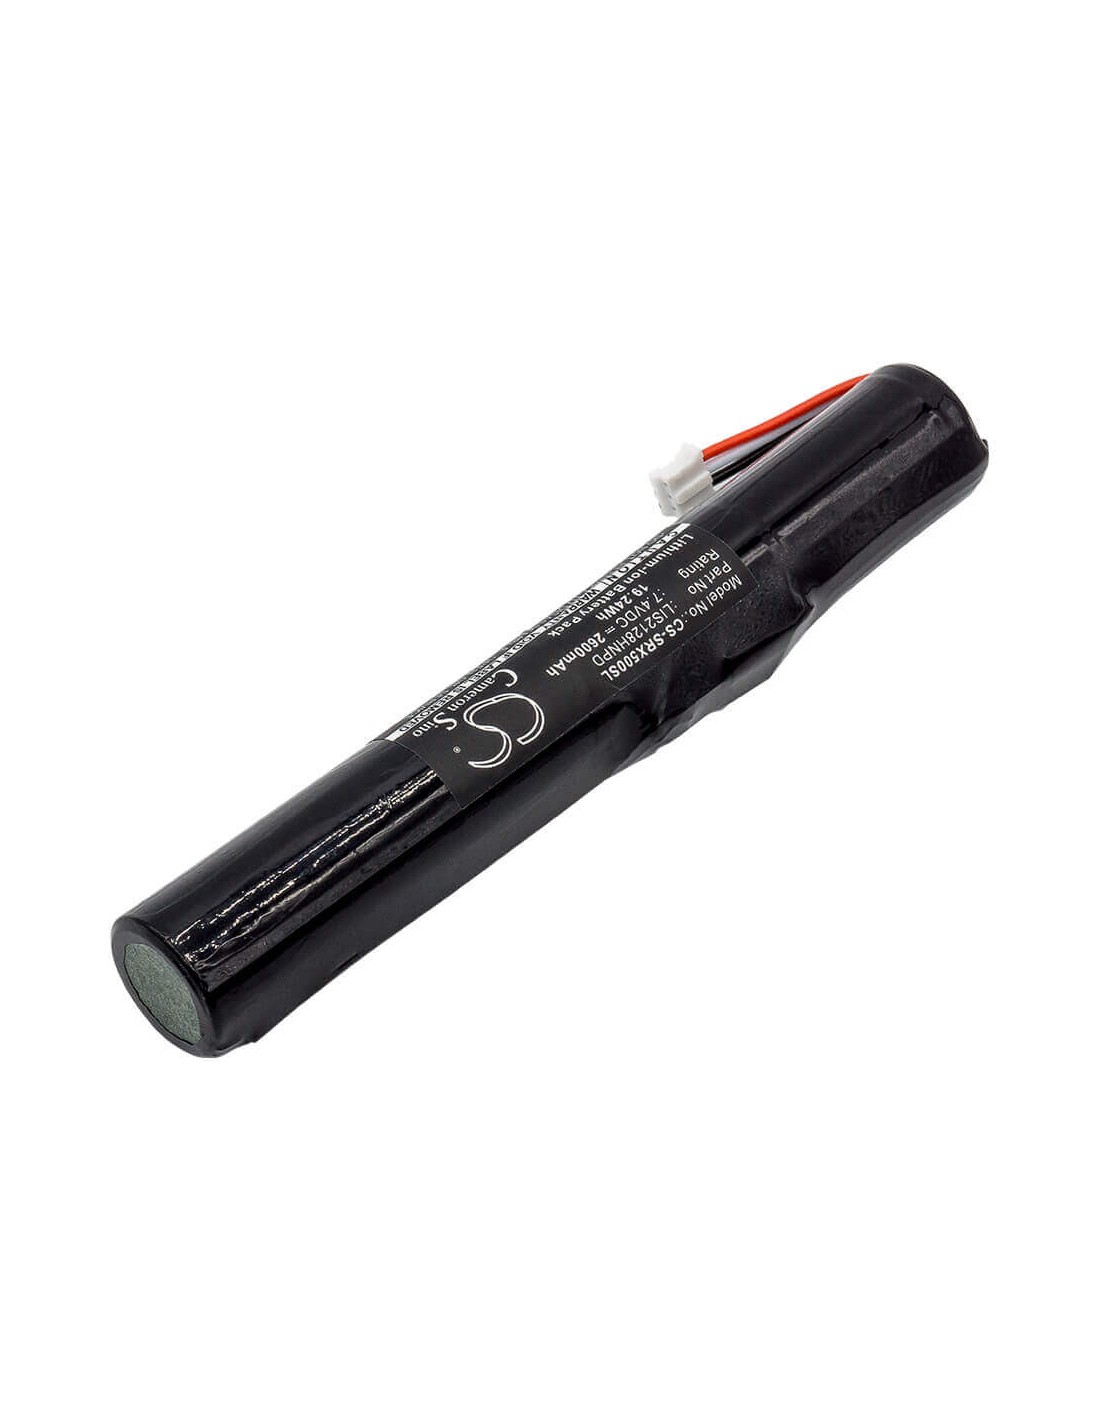 Battery for Sony, Srs-x5 7.4V, 2600mAh - 19.24Wh